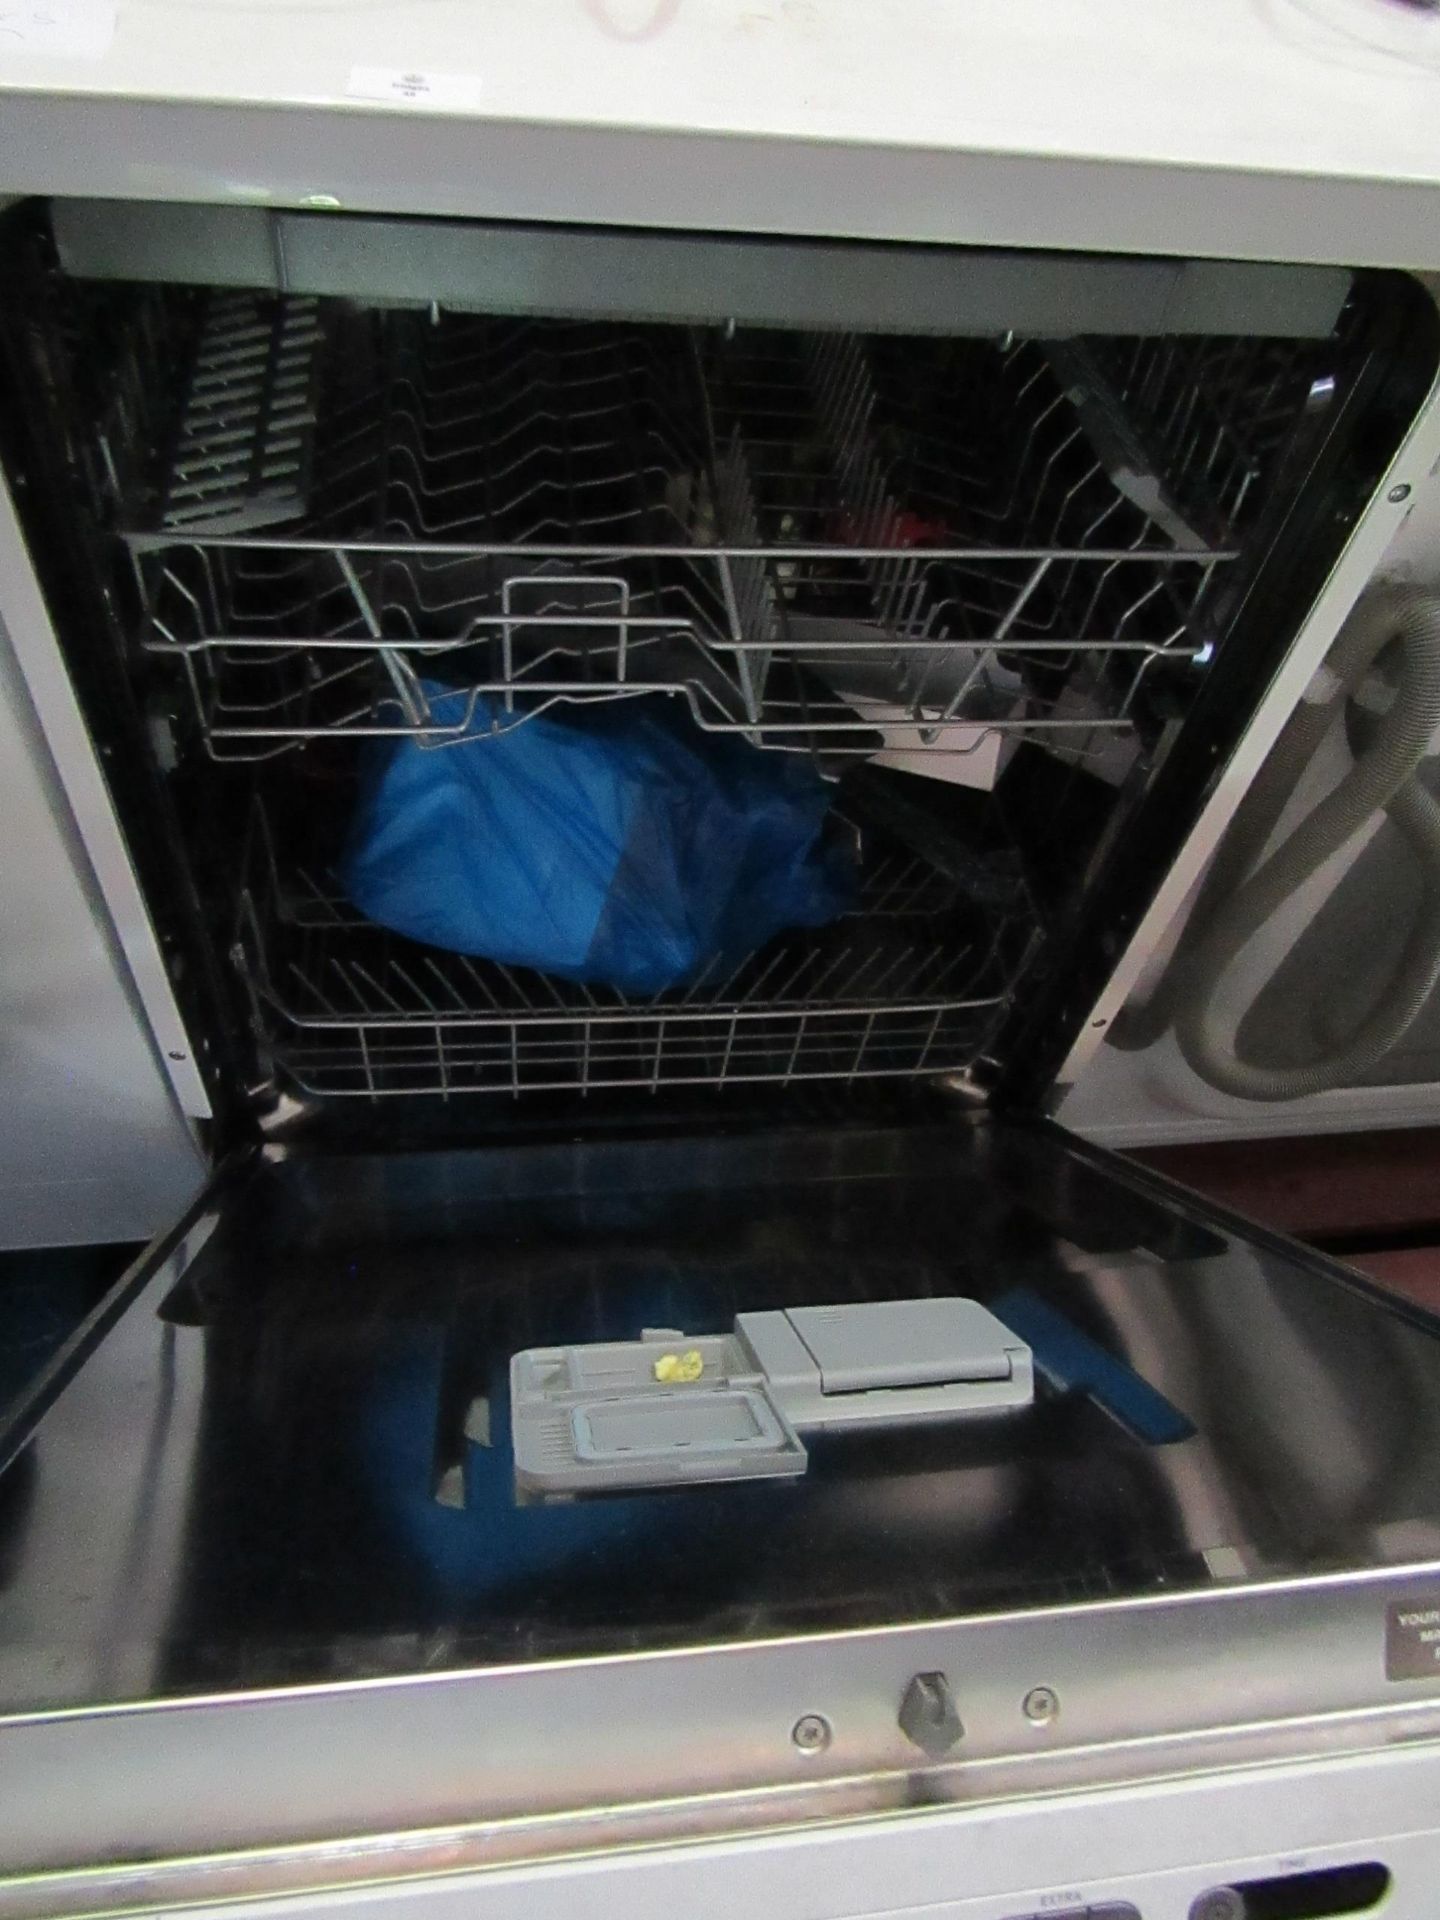 Hisense dishwasher, powers on but we haven't connected it to water to check any further - Image 2 of 3